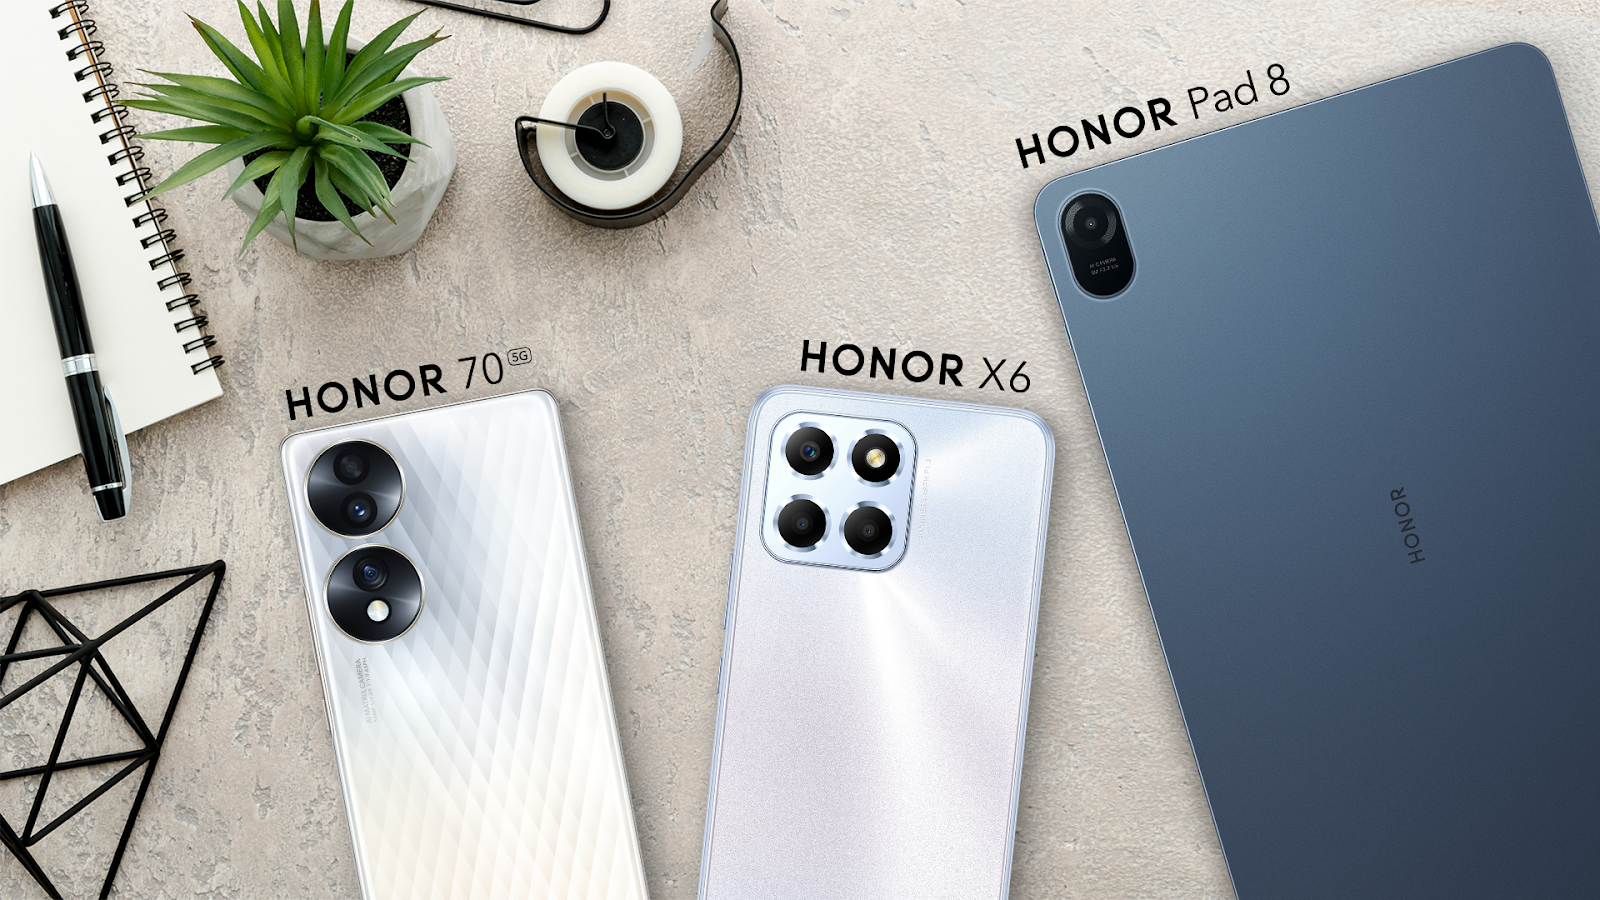 HONOR 70 5G SET TO LAUNCH ON OCTOBER 18